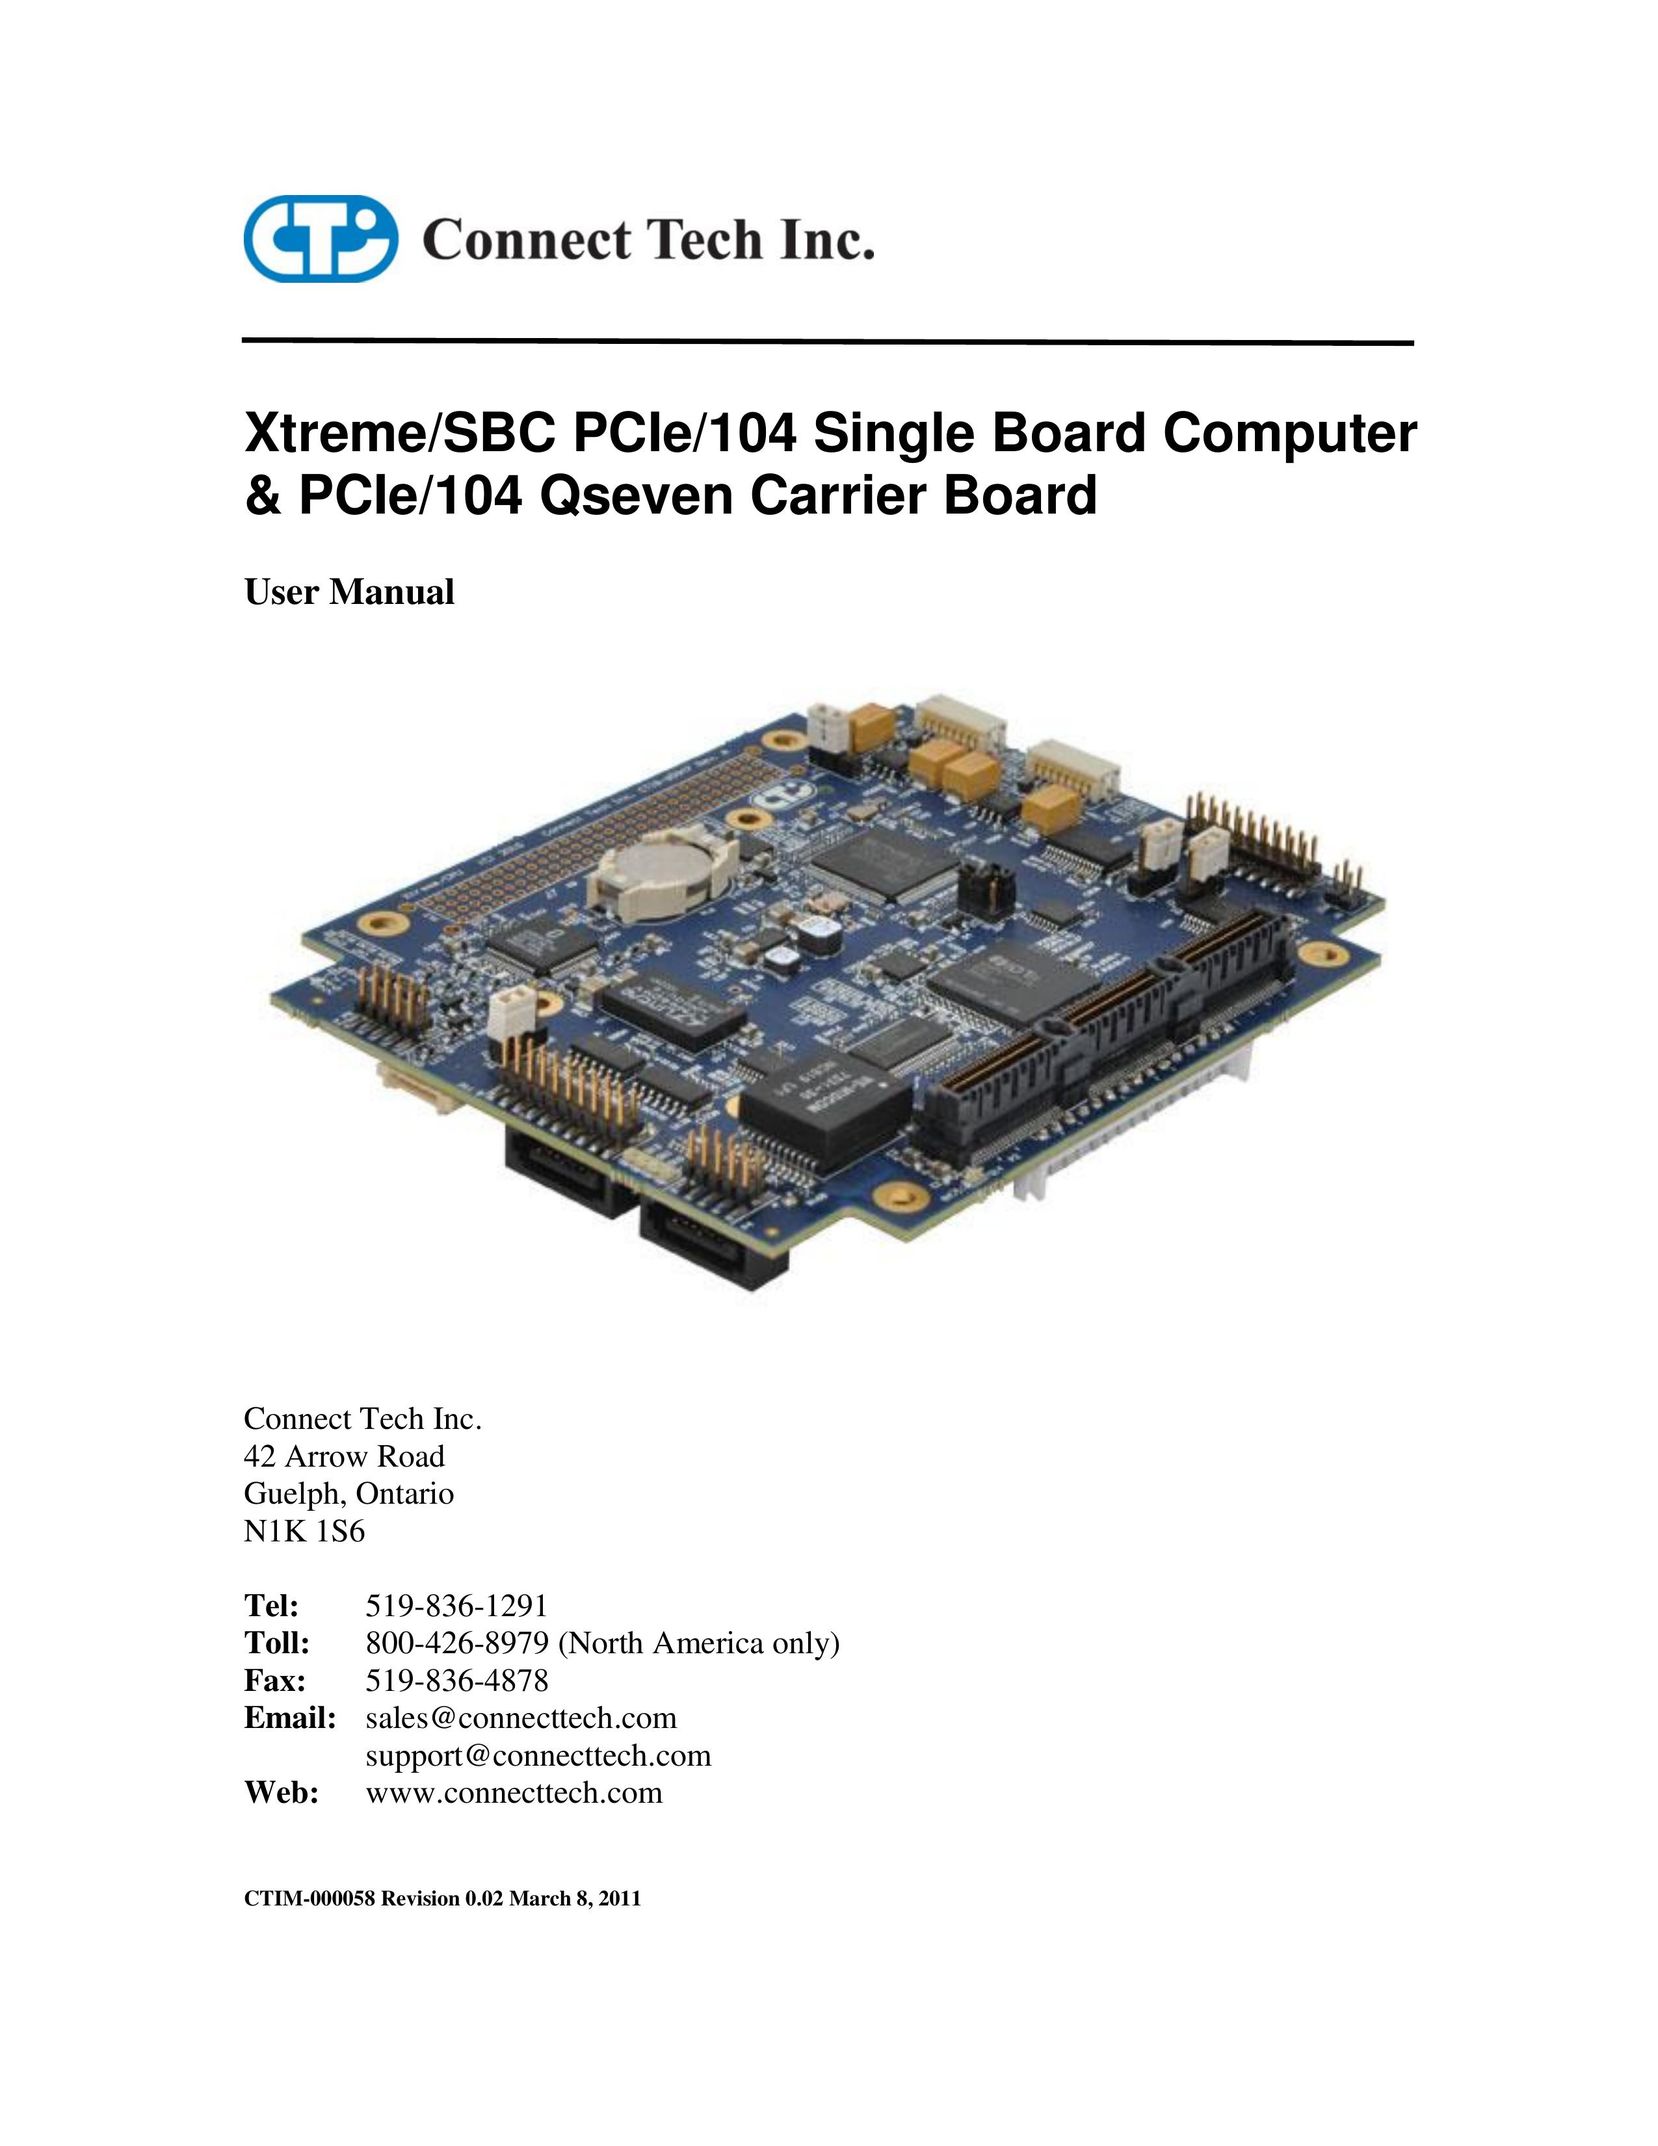 Connect Tech PCIE/104 Computer Hardware User Manual